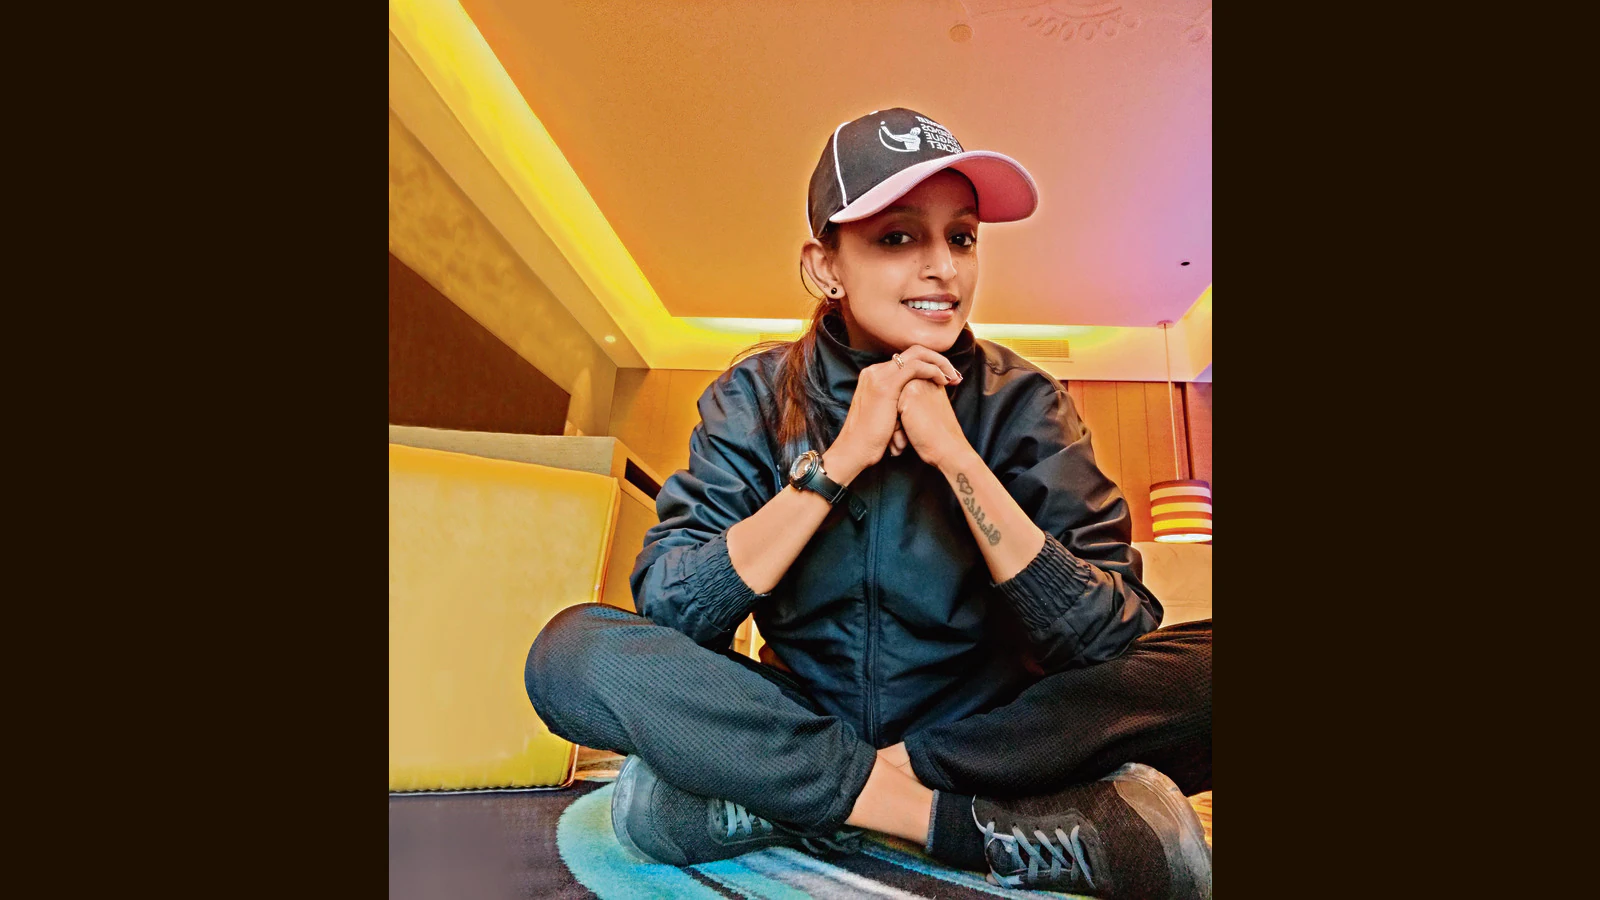 Calling the shots: A Wknd interview with umpire Shubhda Bhosle Gaikwad